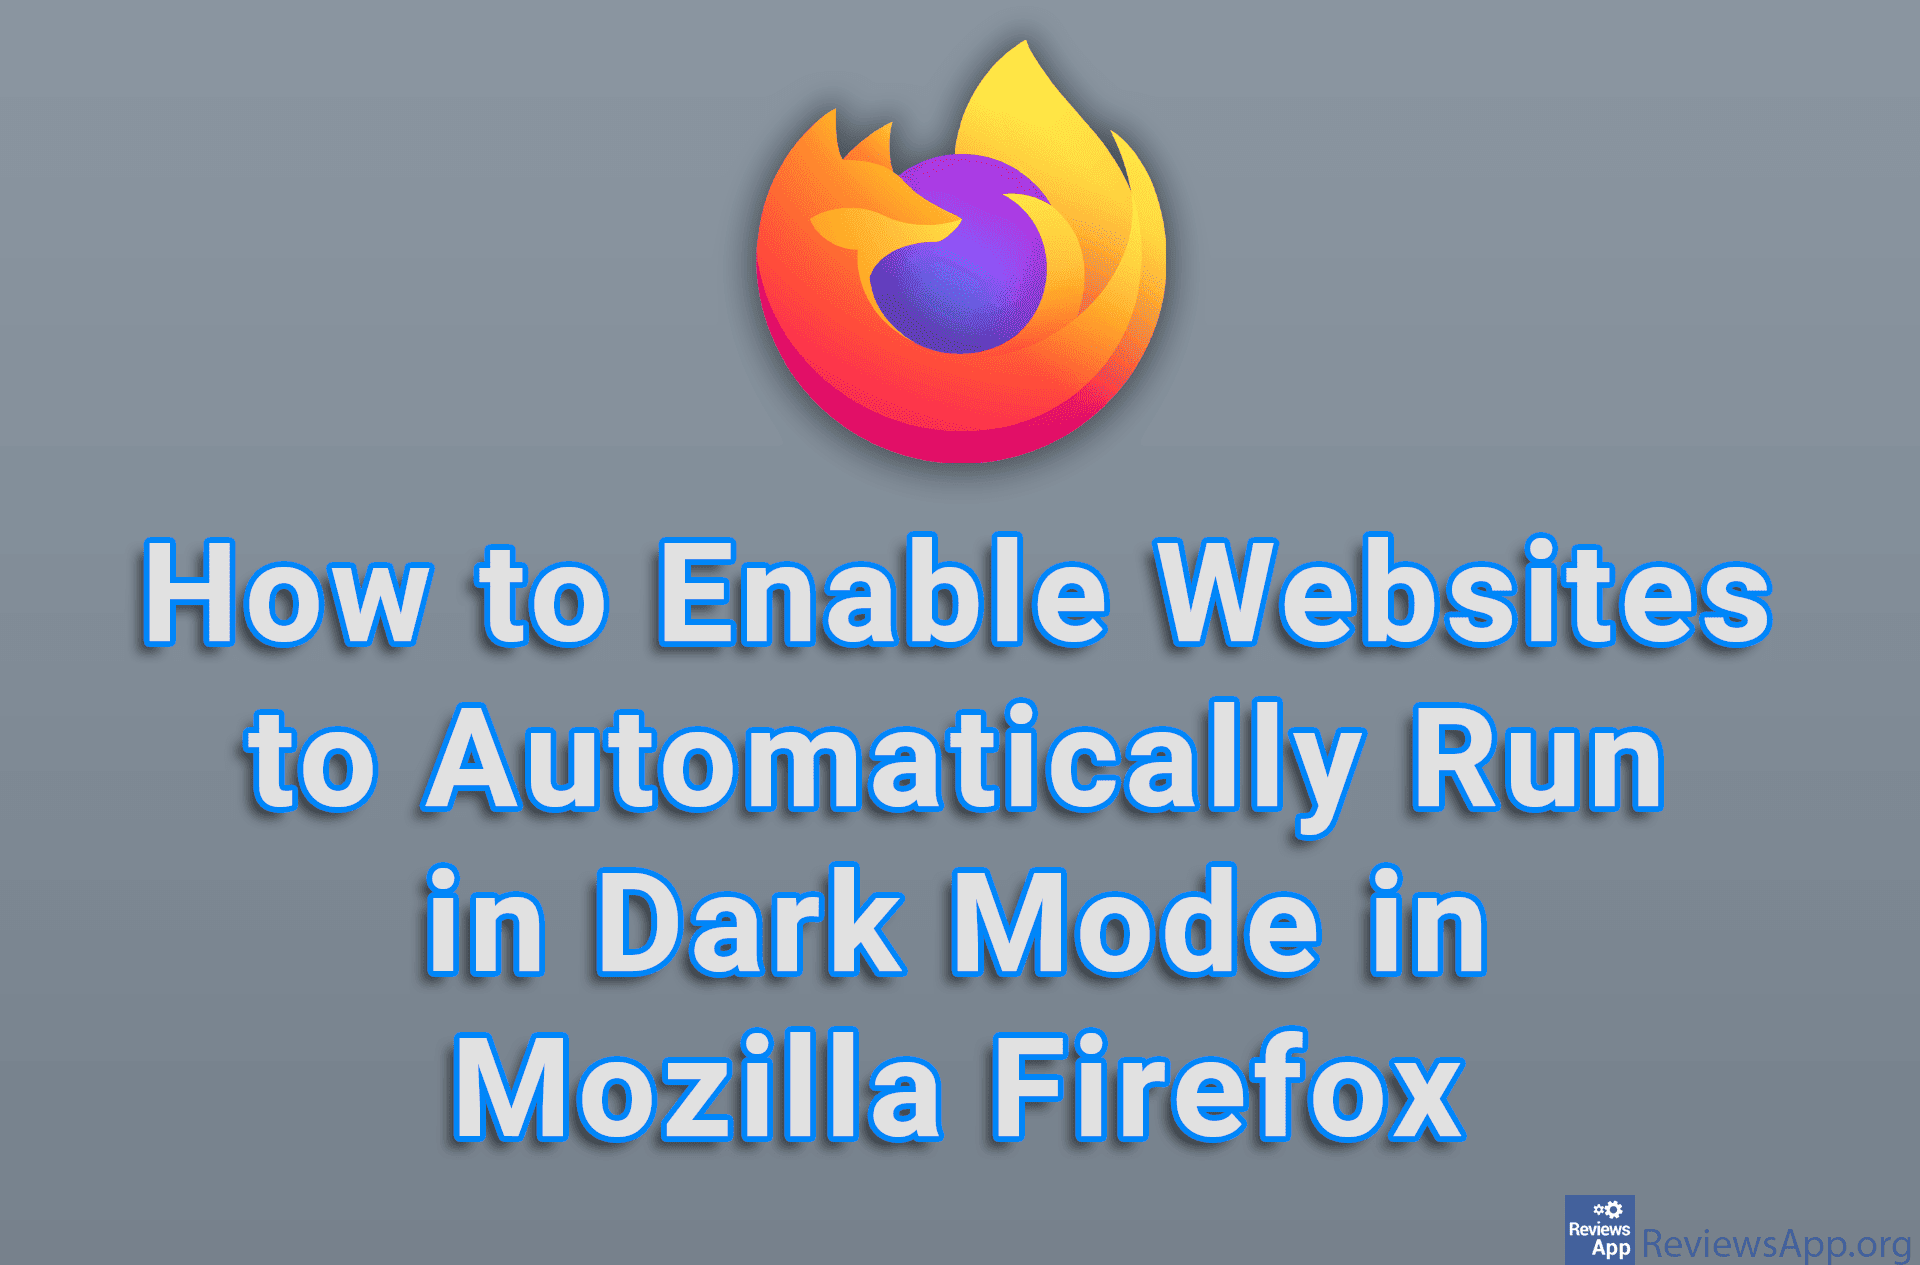 How to Enable Websites to Automatically Run in Dark Mode in Mozilla Firefox